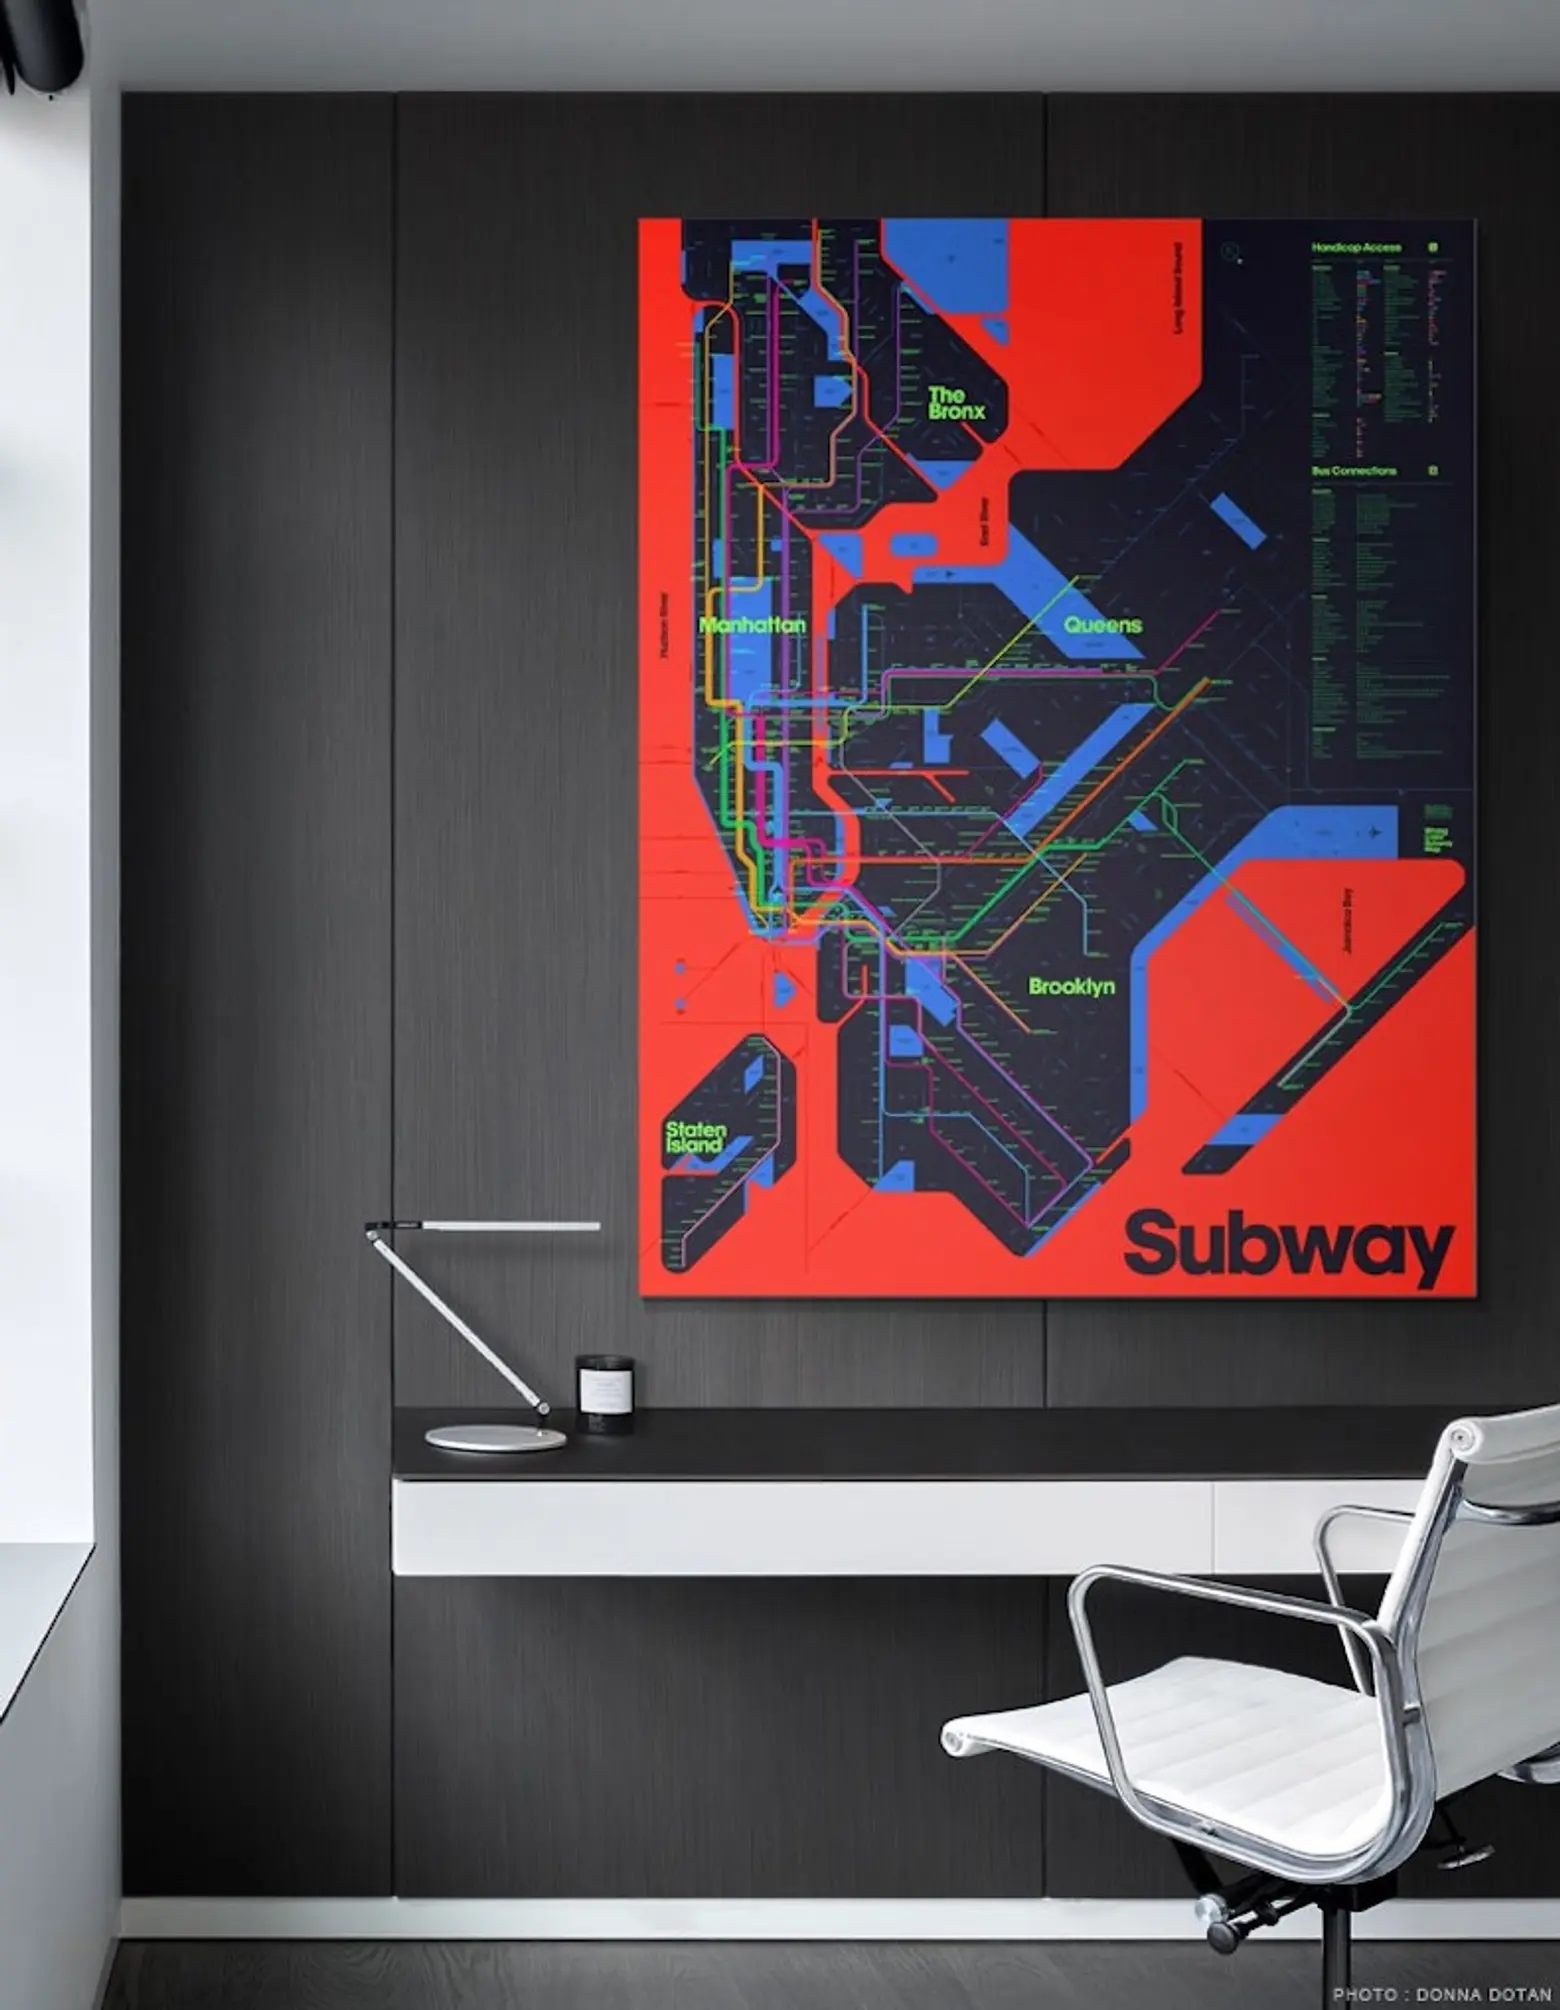 DAVID HEASTY, ONE COLOR SUBWAY MAP, STEFANIE WEIGLER, TRIBORO, WRONG COLOR SUBWAY MAP